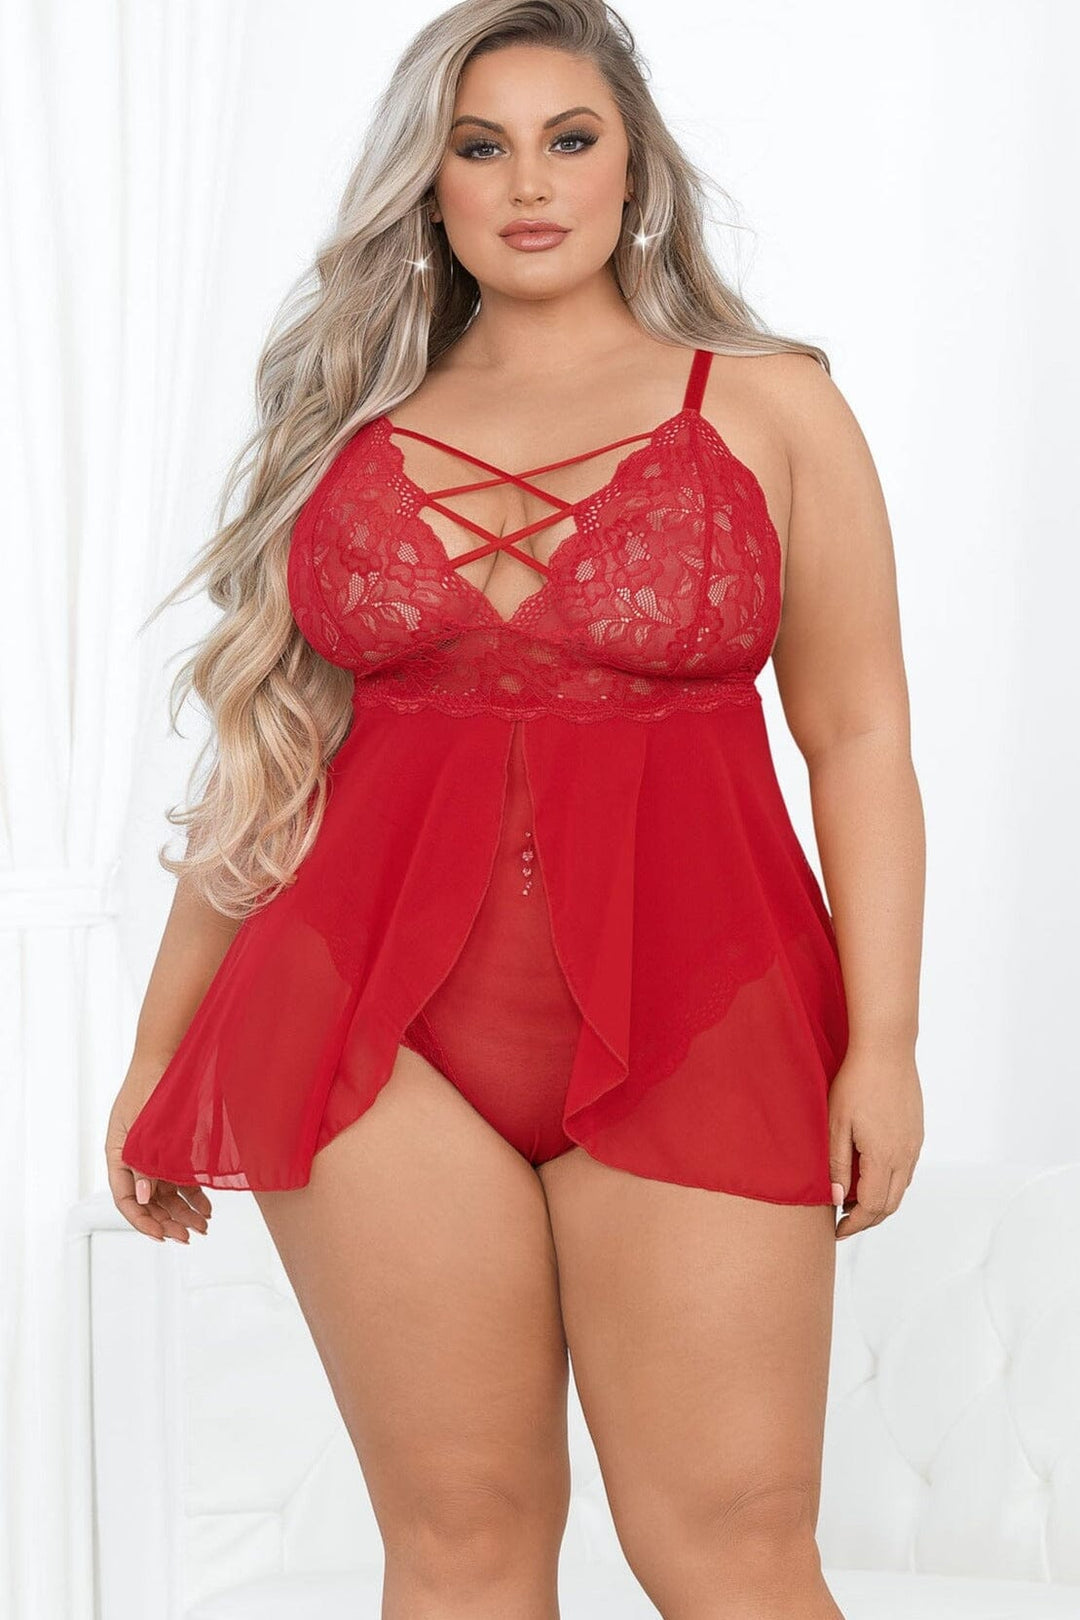 Plus Size Embroidered & Mesh Teddydoll-Teddies-Escante-Red-3X-SEXYSHOES.COM